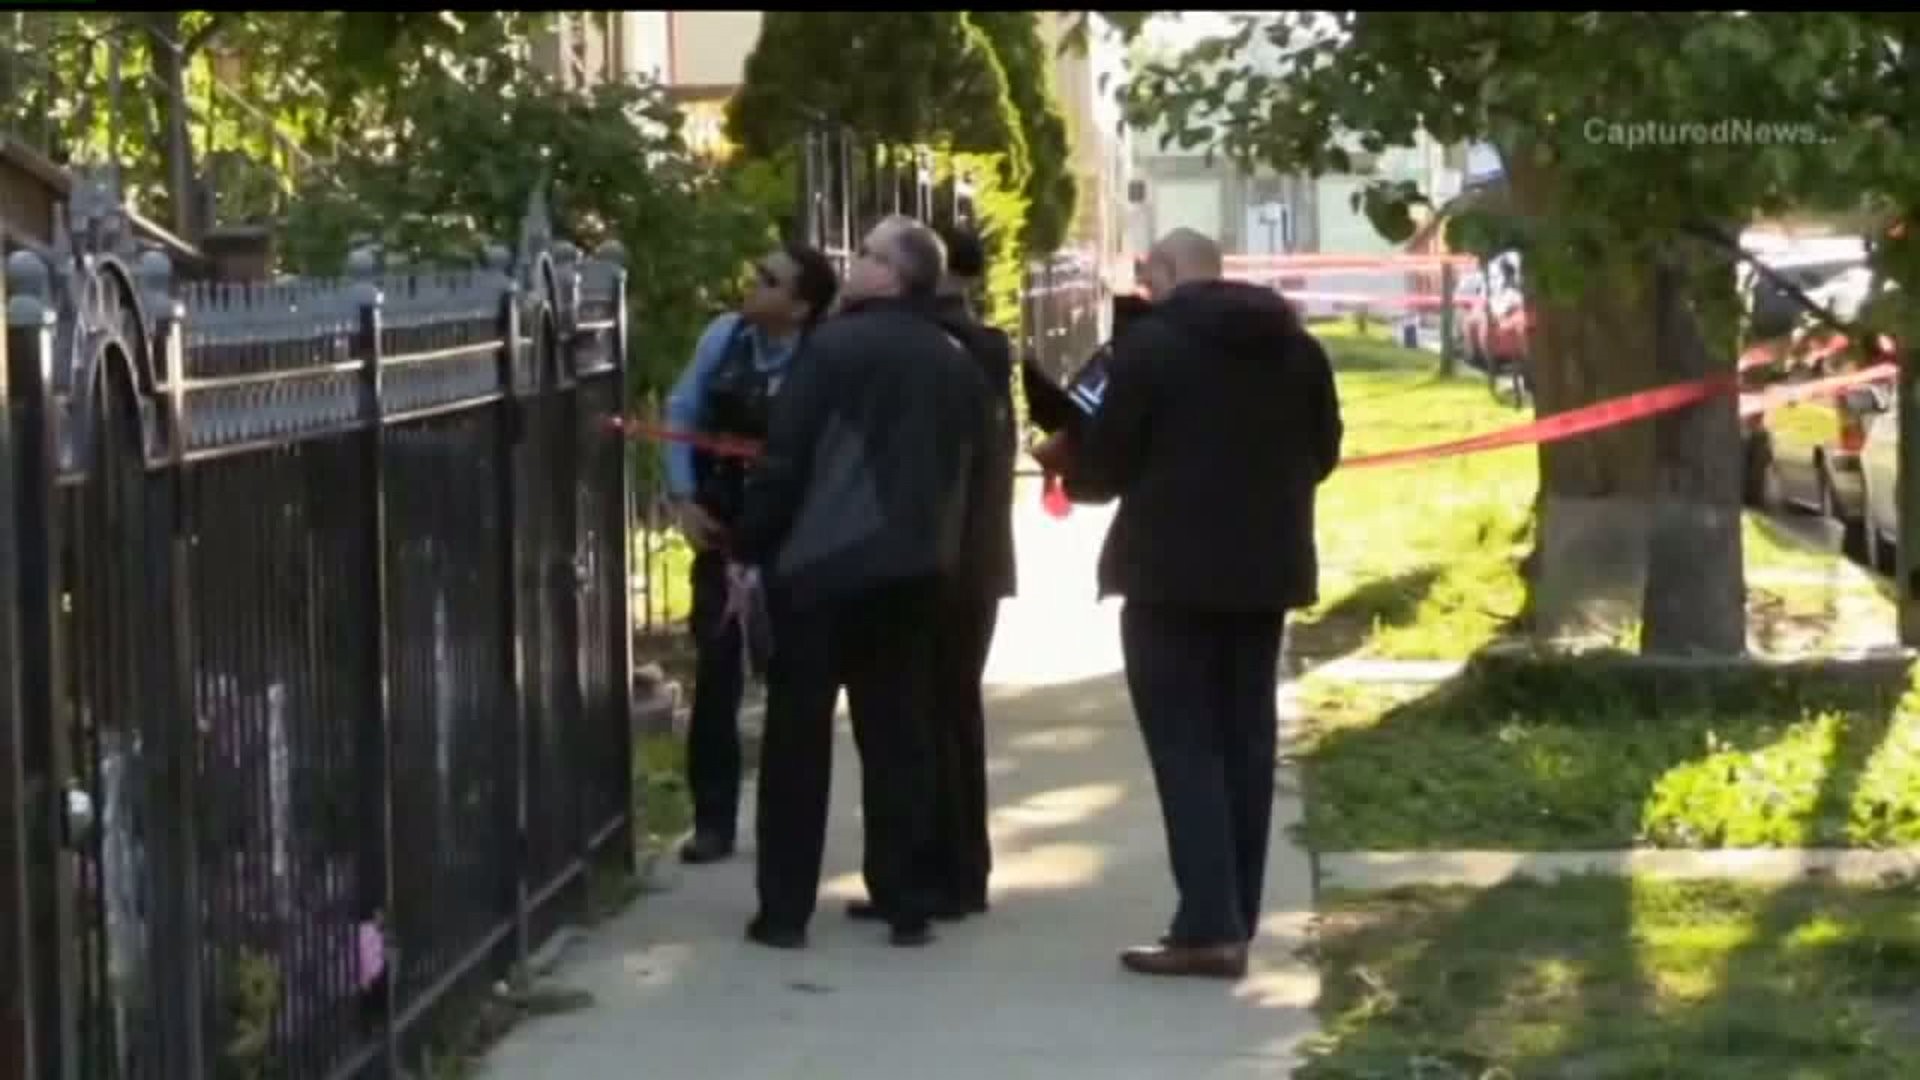 10 shot in gang-related shooting in Chicago